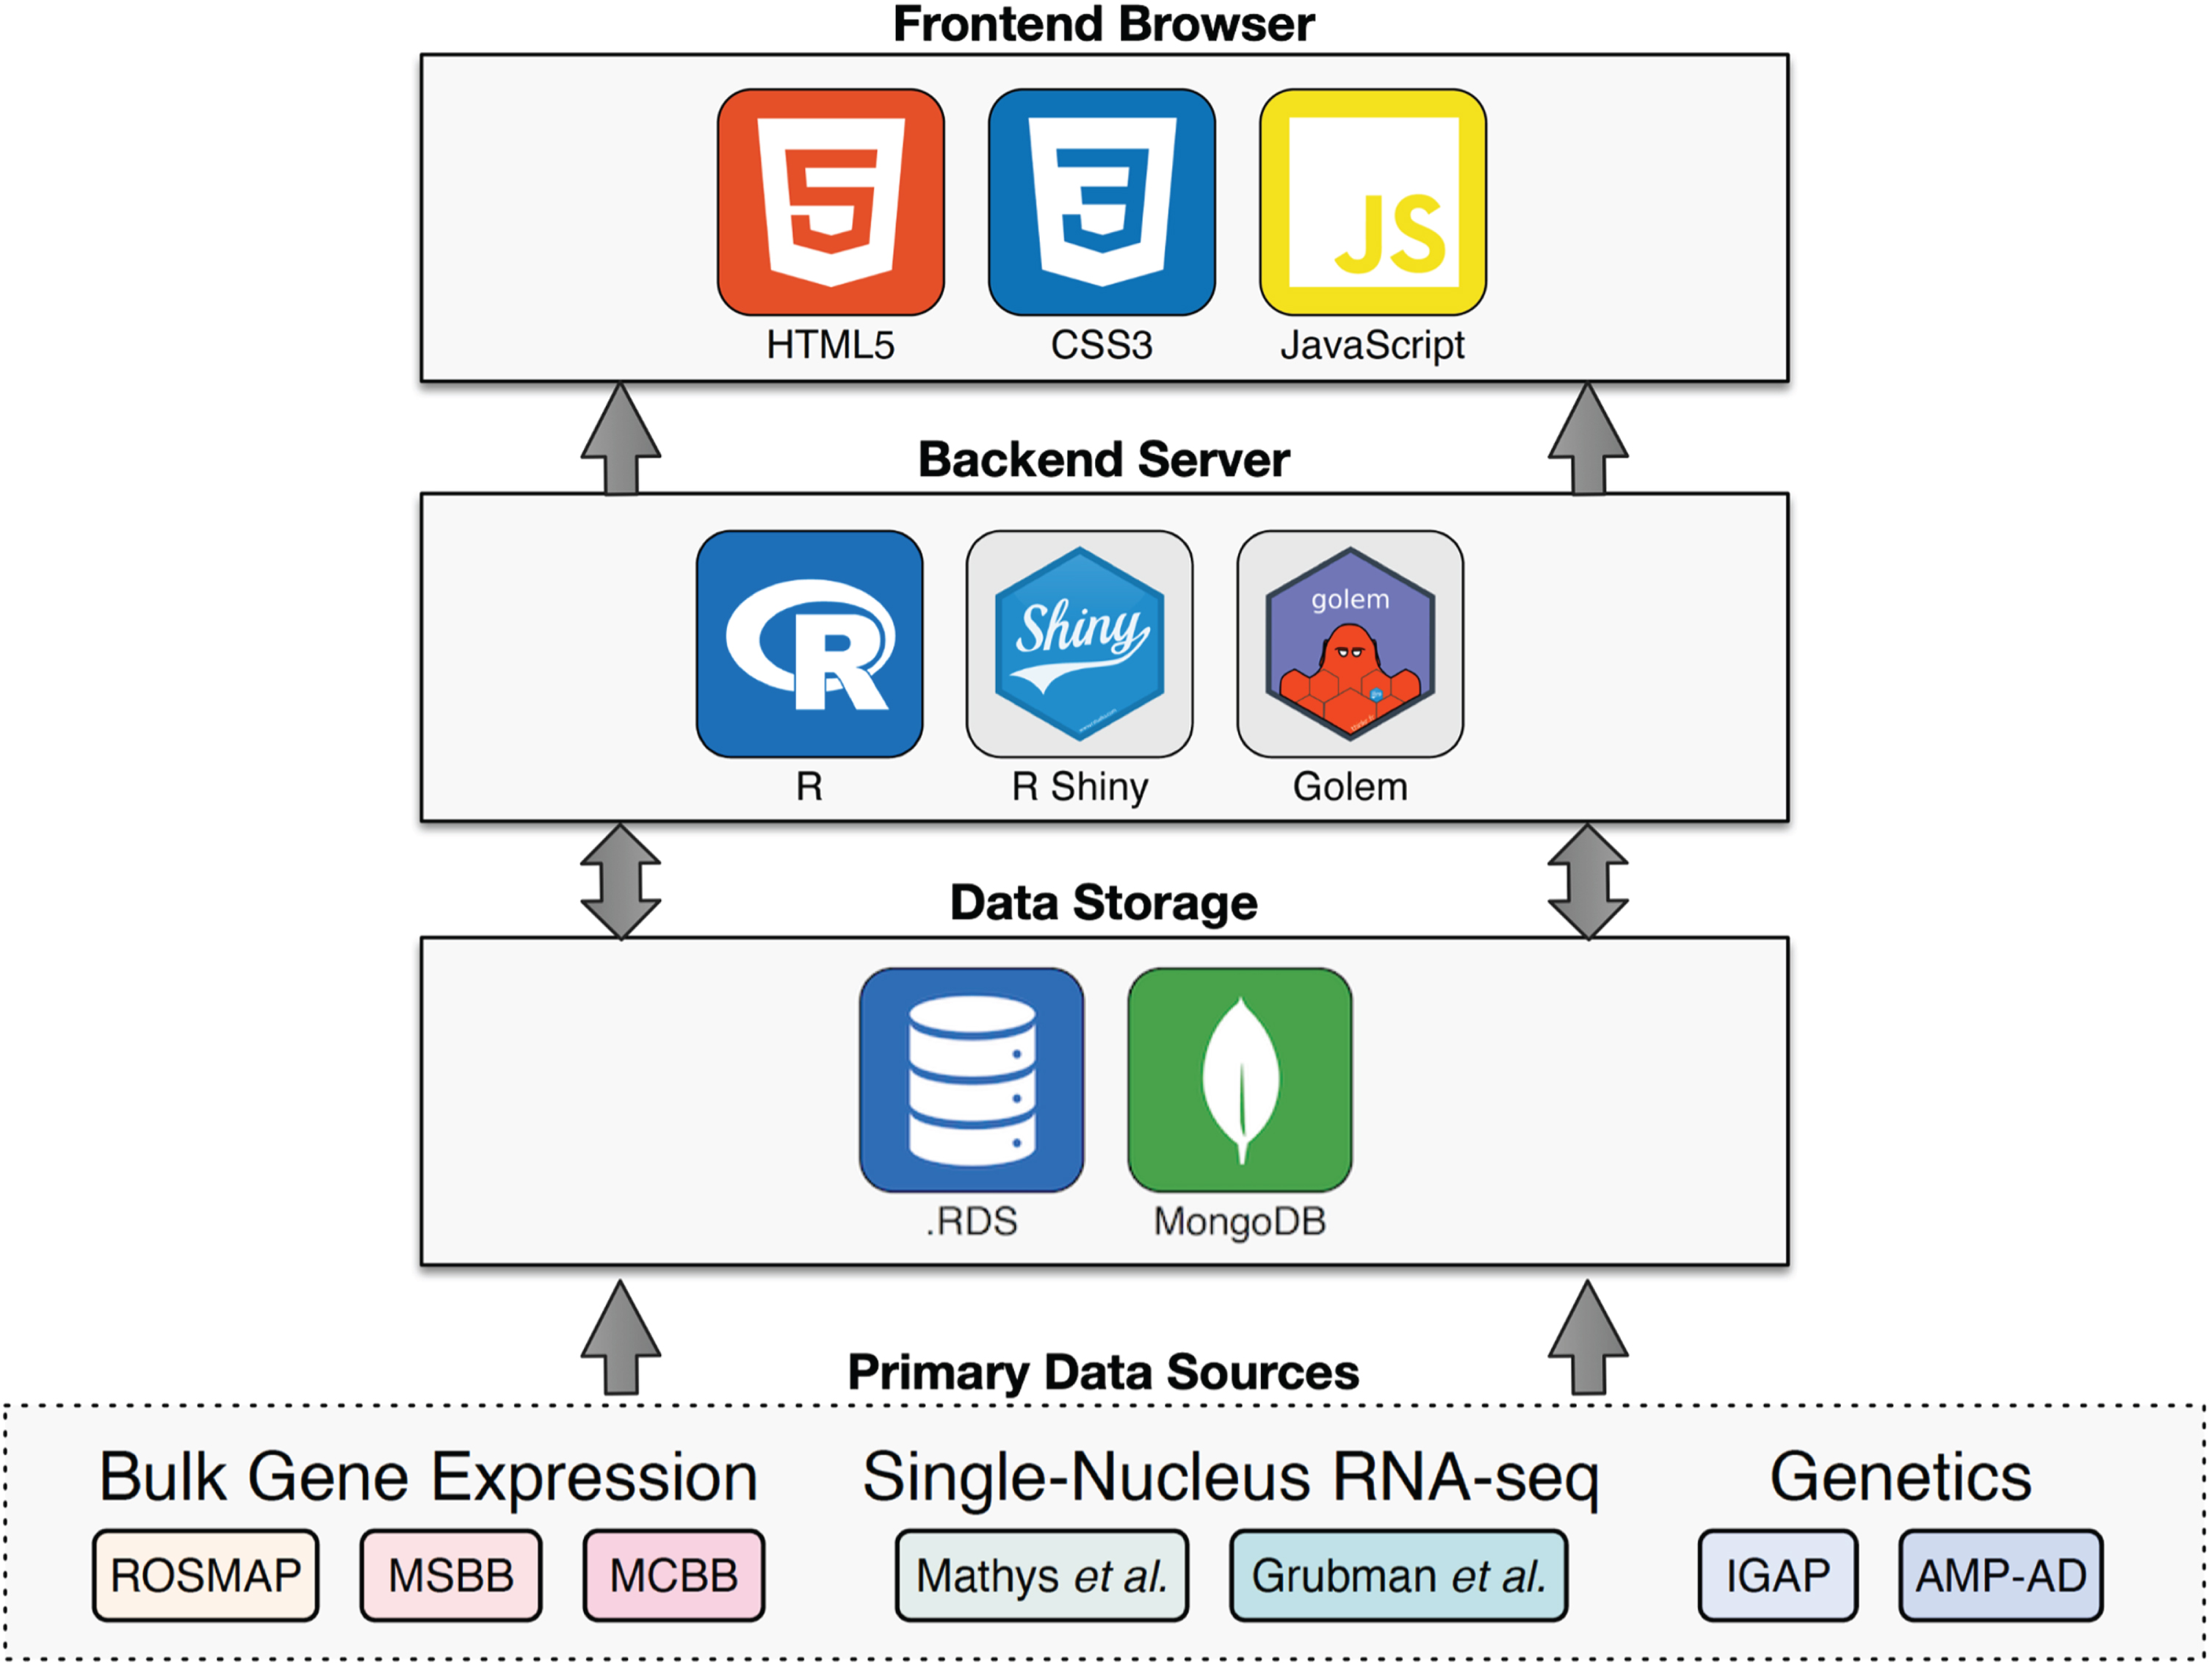 Architecture overview. Summary of the technology stack used in Alzheimer DataLENS. Primary data is processed by consistent pipelines and stored either in a MongoDB database or as.RDS files. The R Shiny server queries and processes the data to display on the front-end web browser.